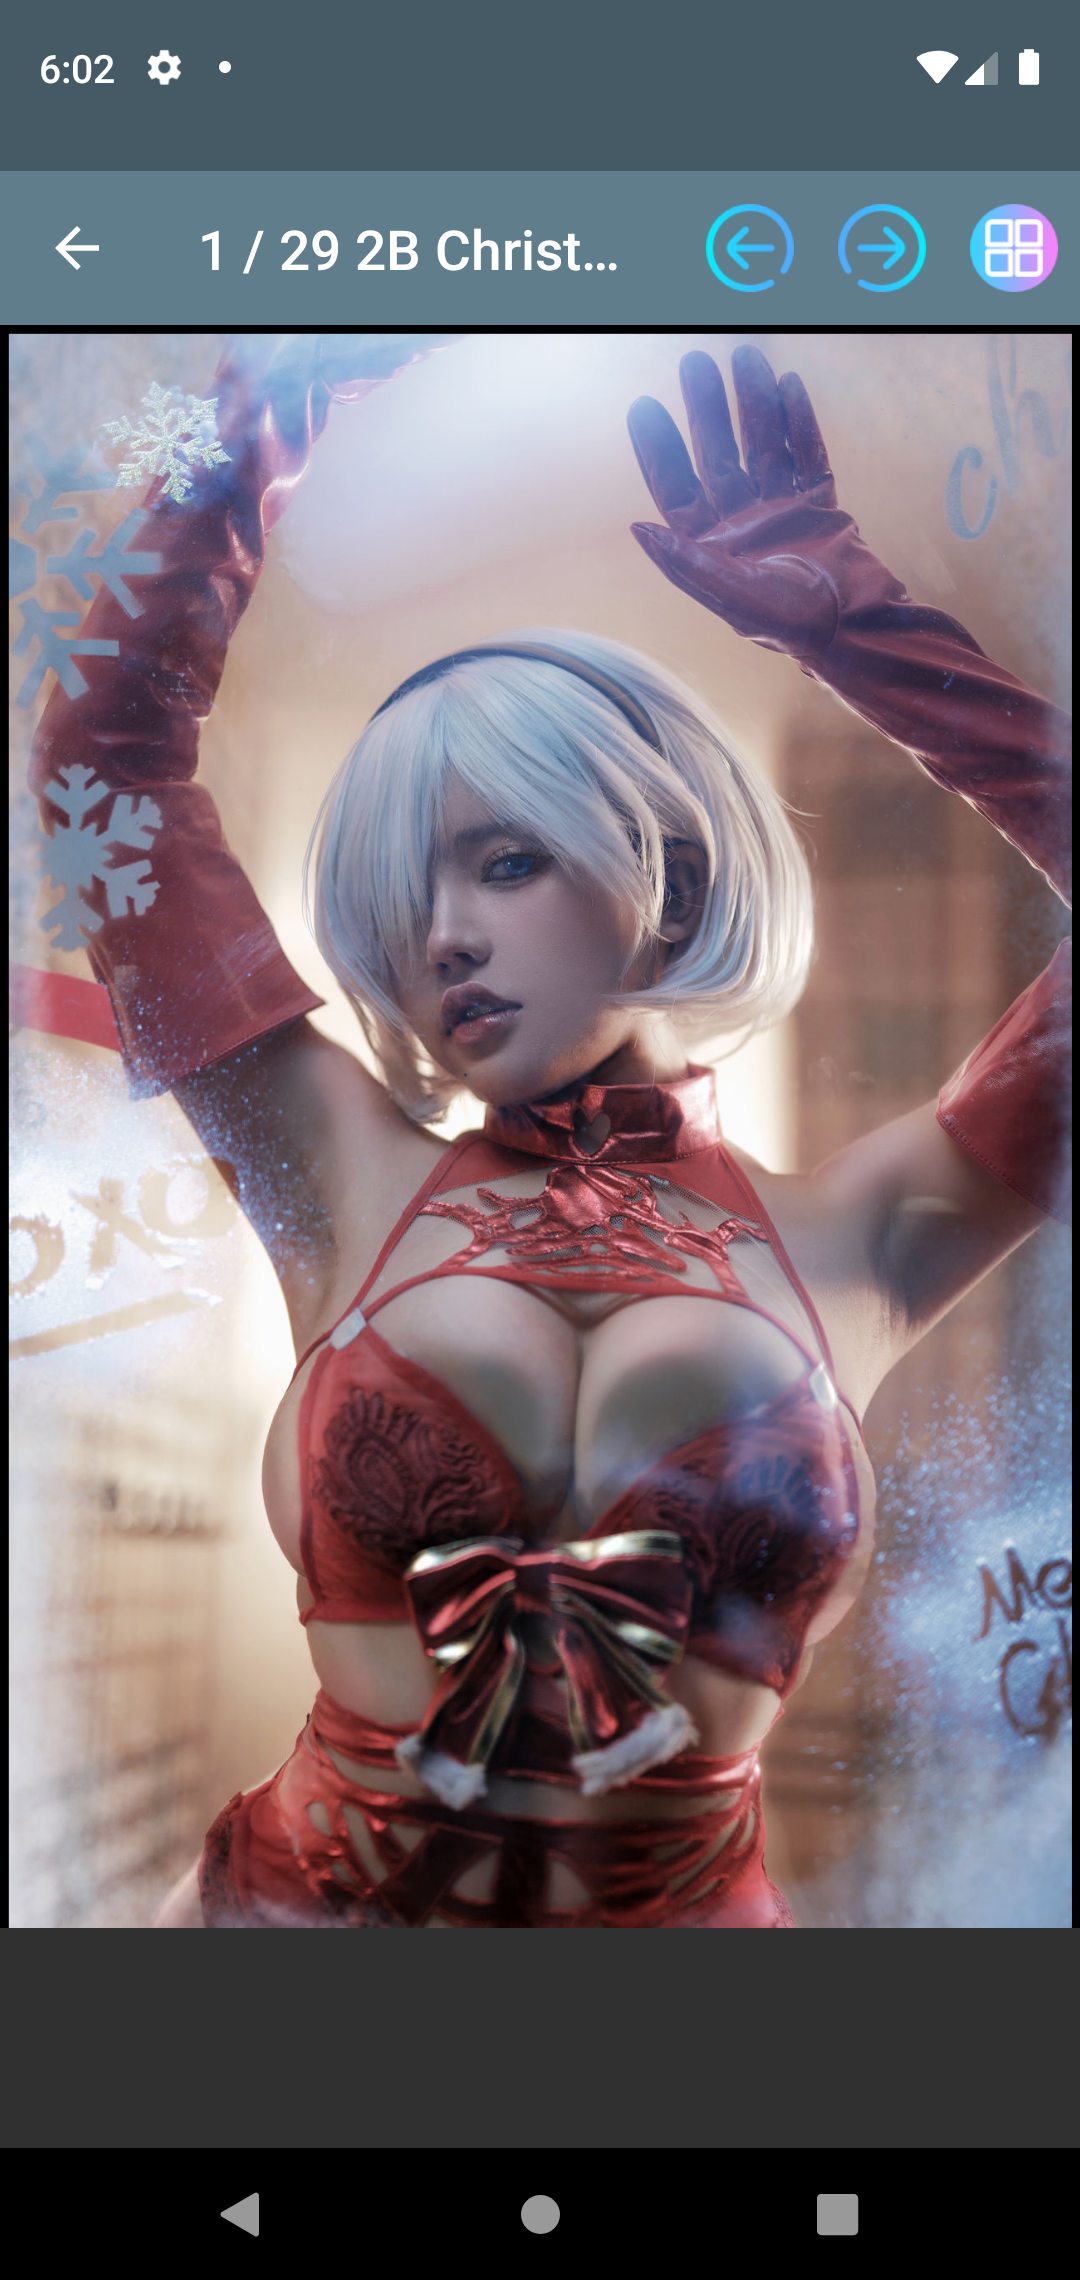 Nier Pictures app,pictures,tanlines,porn,wallpaper,wallpapers,erotic,gallery,pics,ass,hentail,android,download,galleries,adult,big,comics,manga,sexy,image,nier,apps,hentai,pic,apk